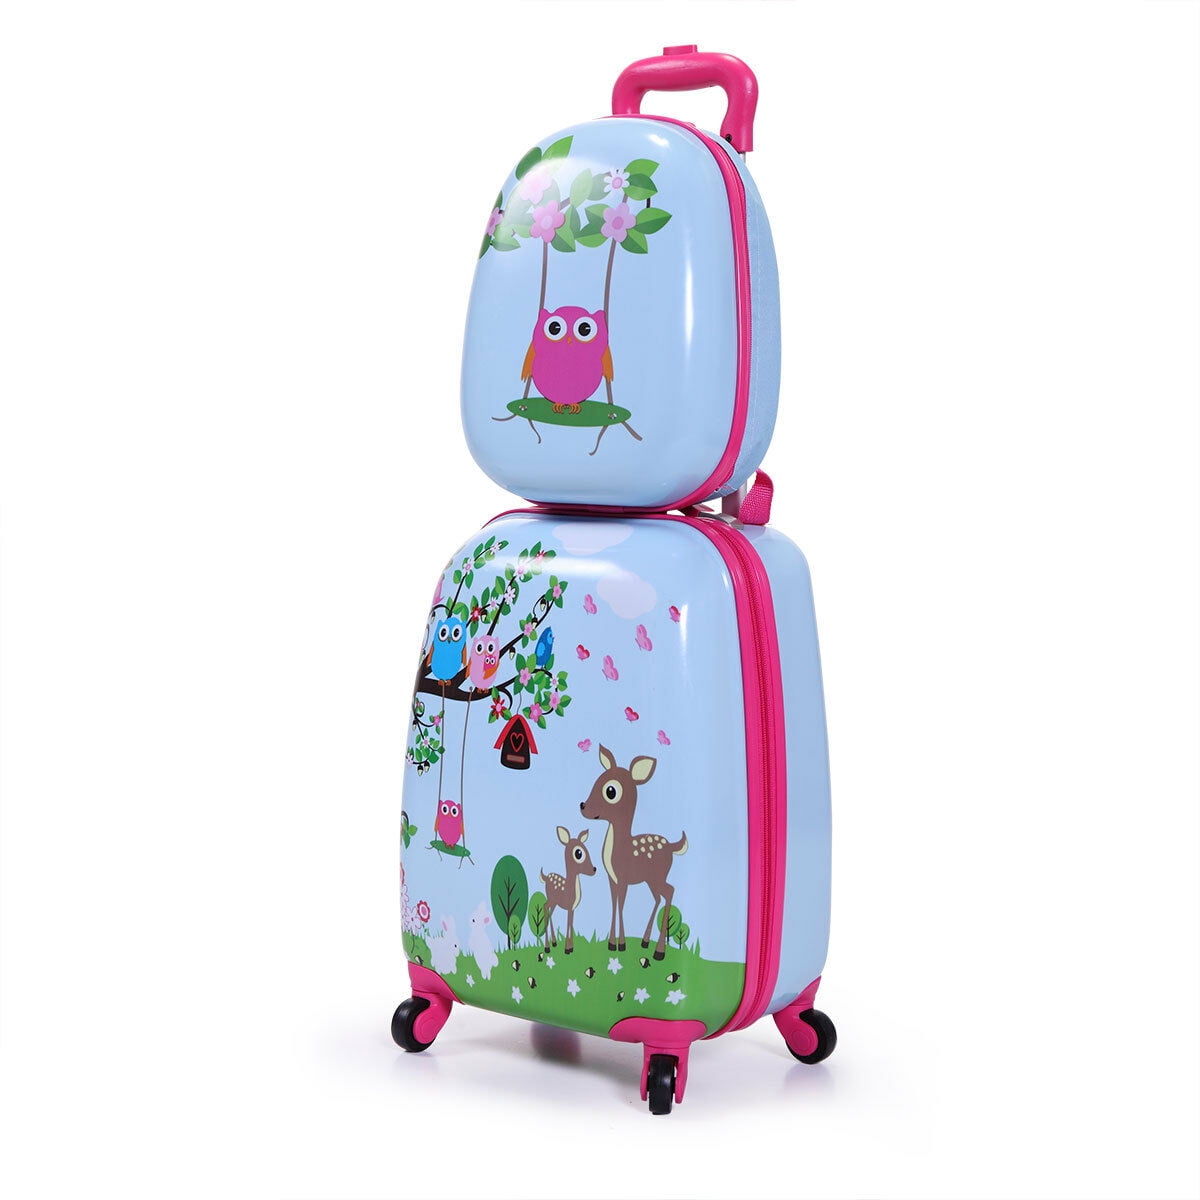 Suitcases Bags Travel Children, Best Carry Luggage Kids